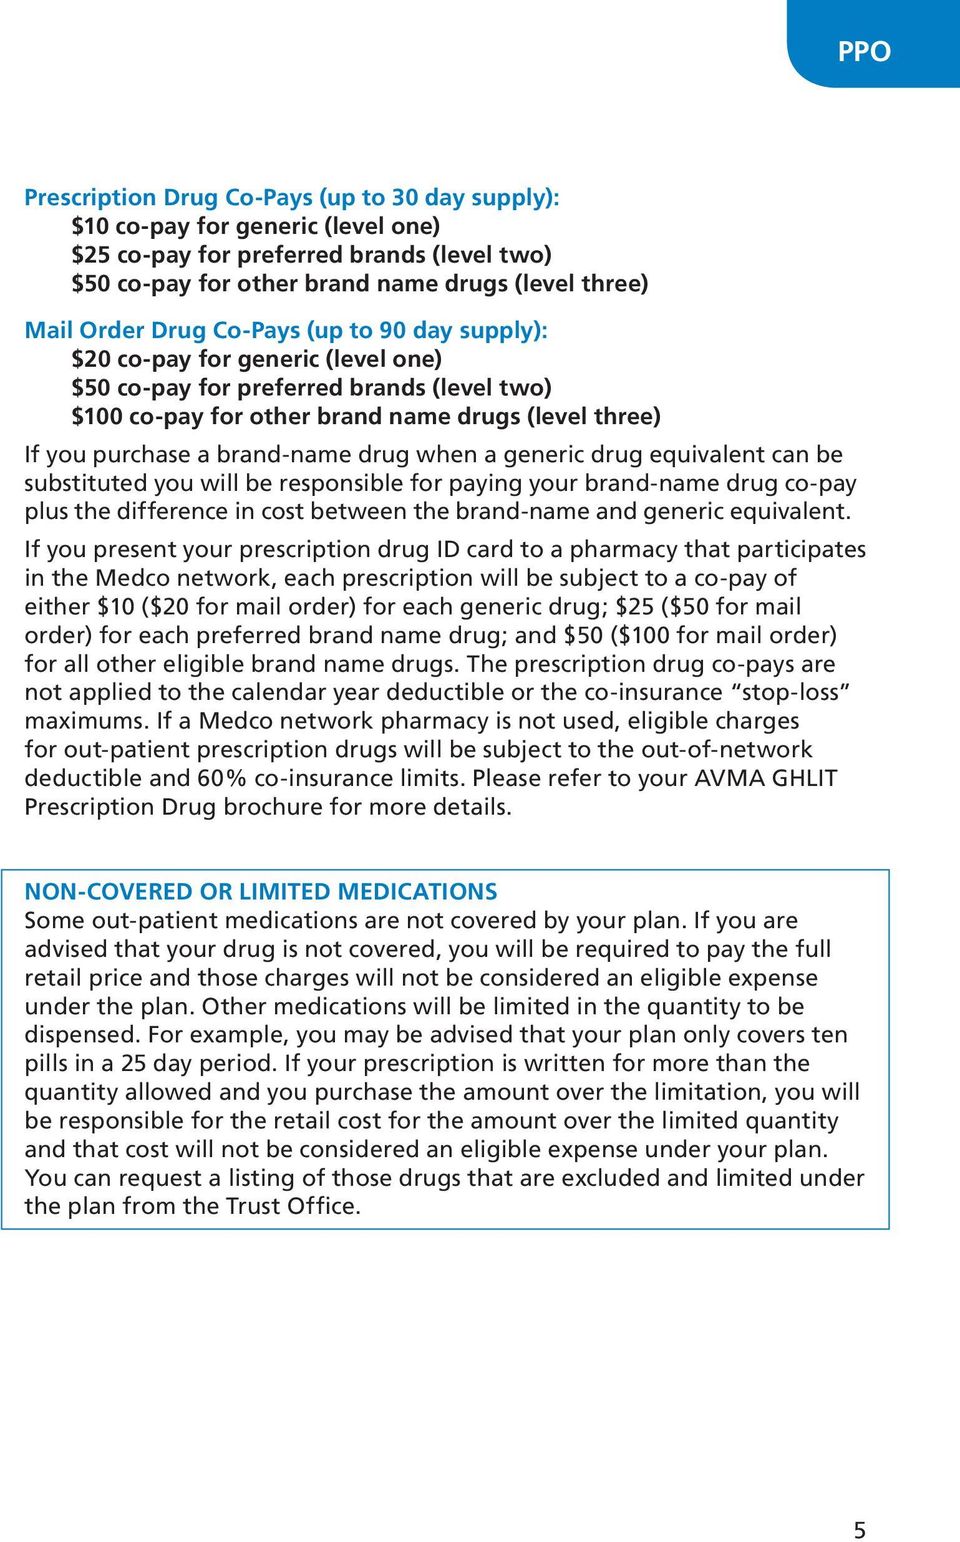 when a generic drug equivalent can be substituted you will be responsible for paying your brand-name drug co-pay plus the difference in cost between the brand-name and generic equivalent.